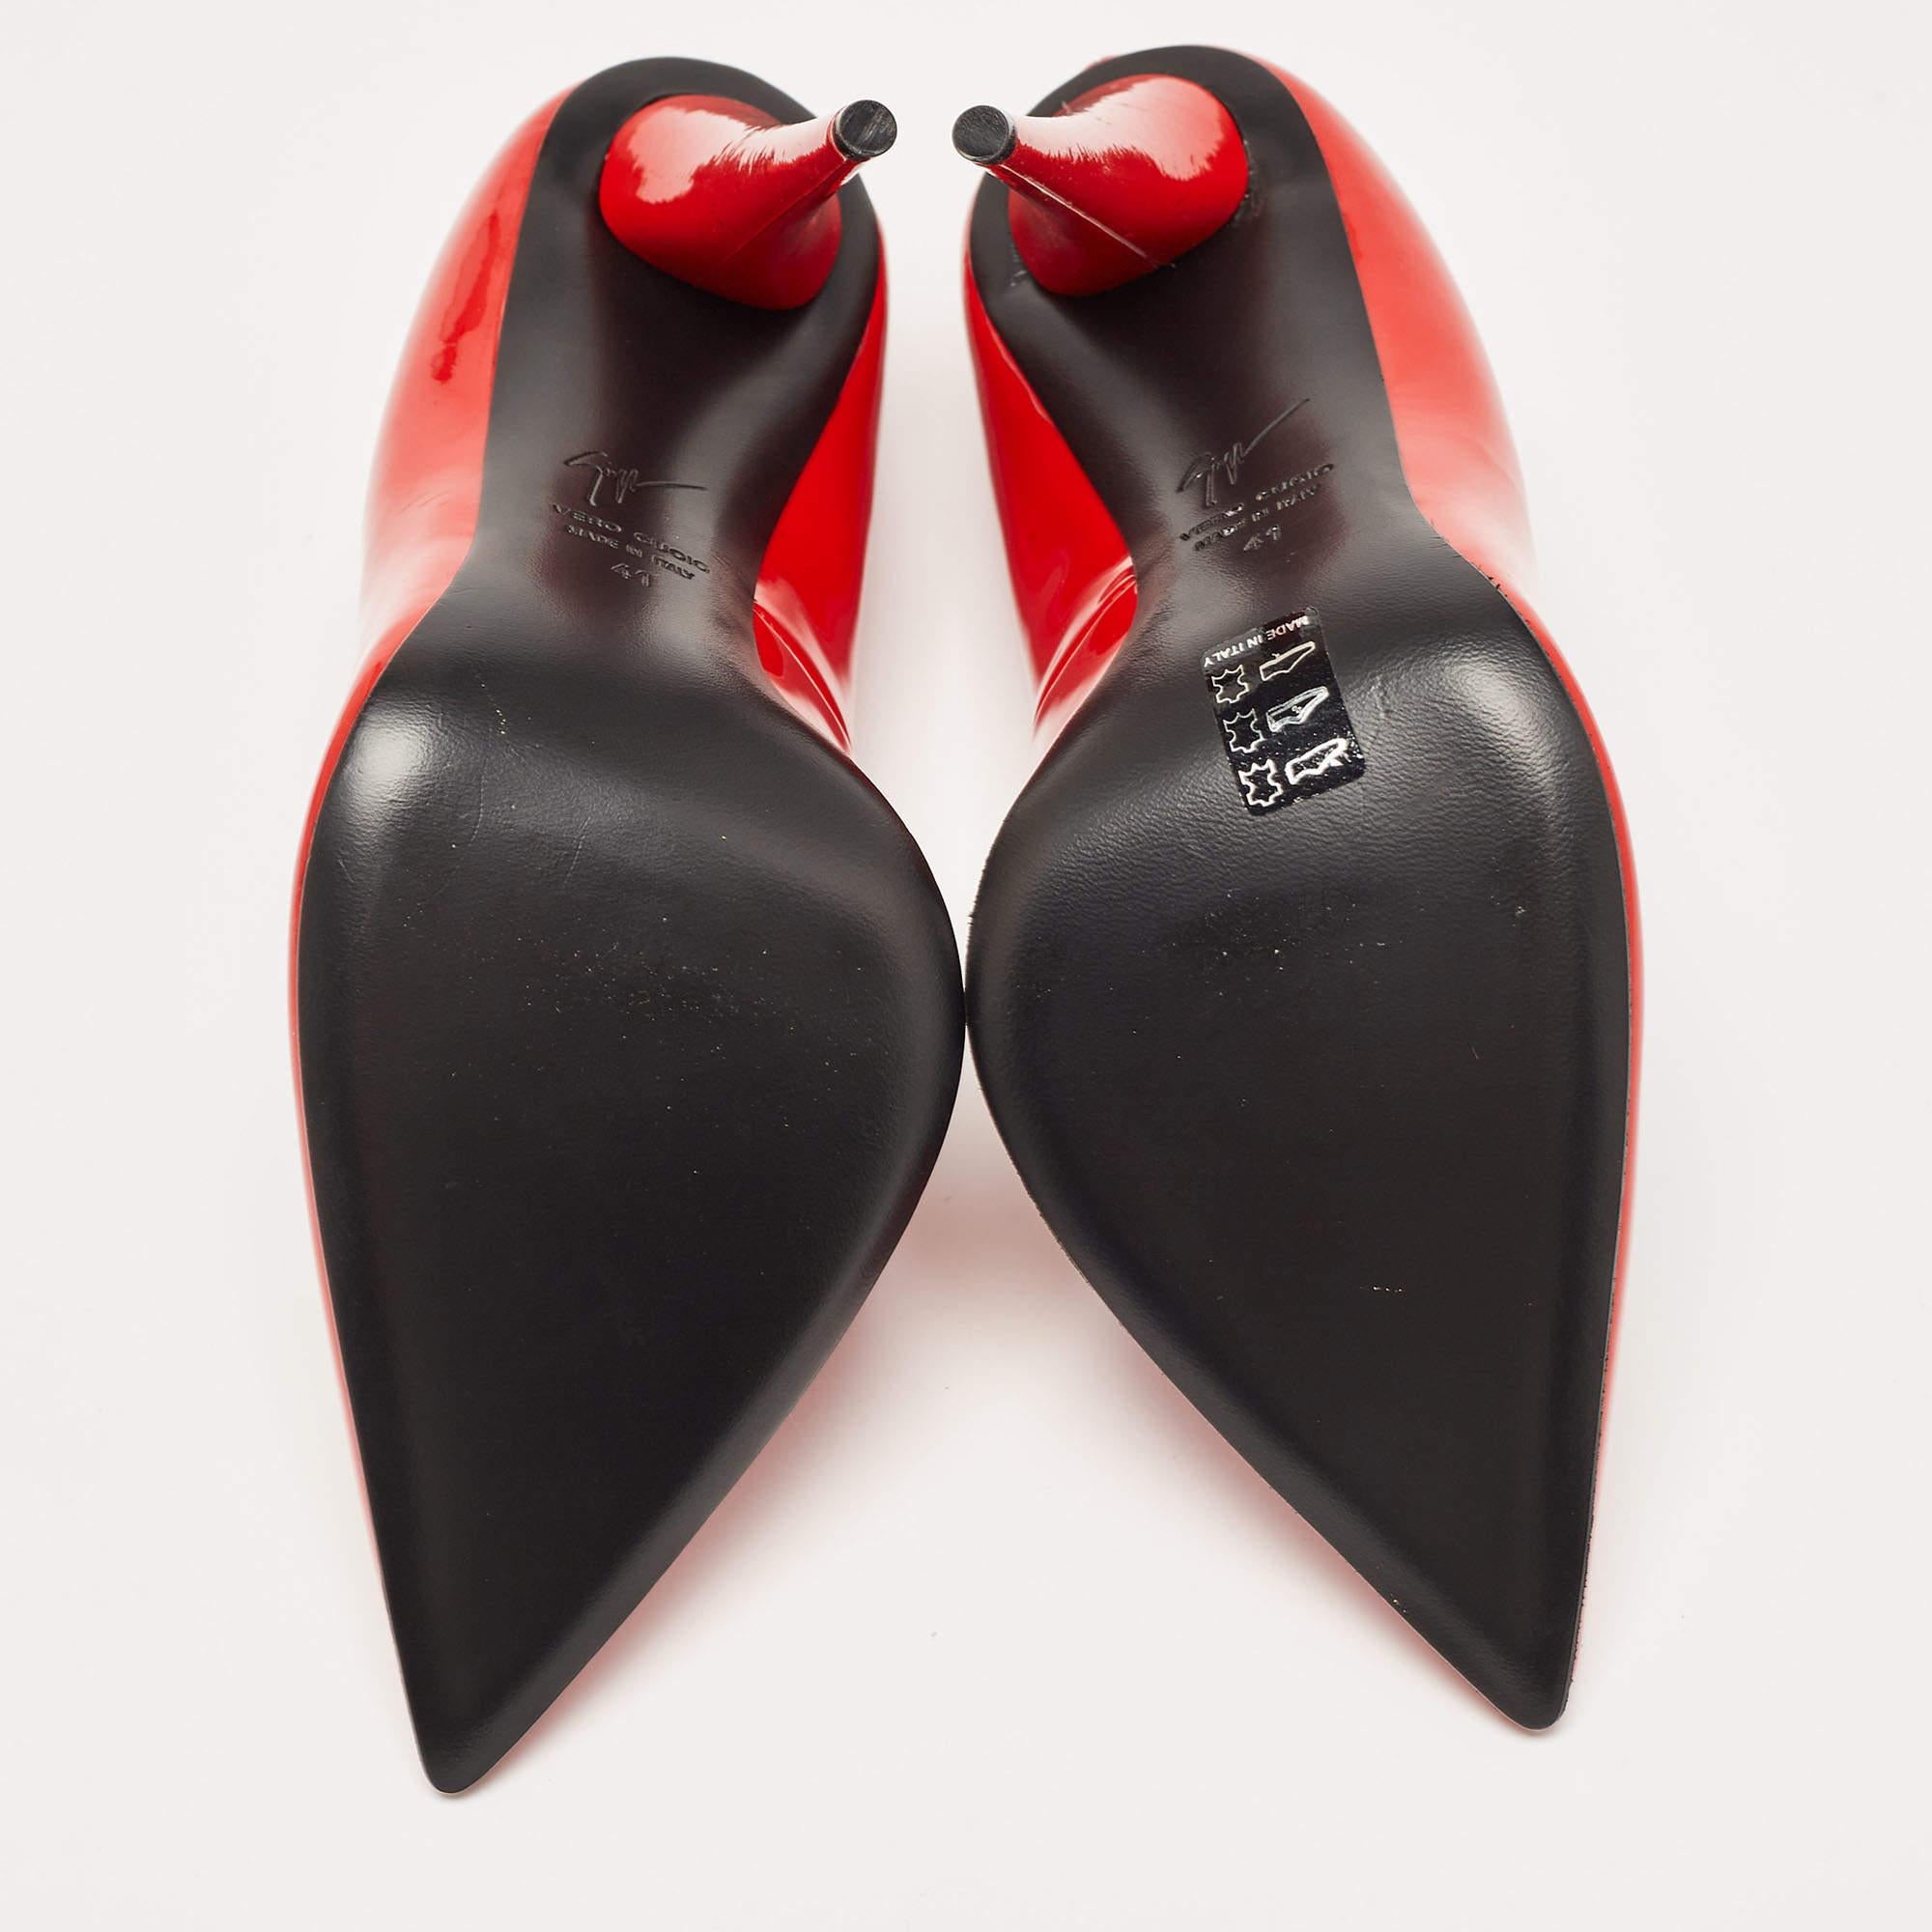 Giuseppe Zanotti Red Patent Leather Pointed Toe Pumps Size 41 For Sale 2